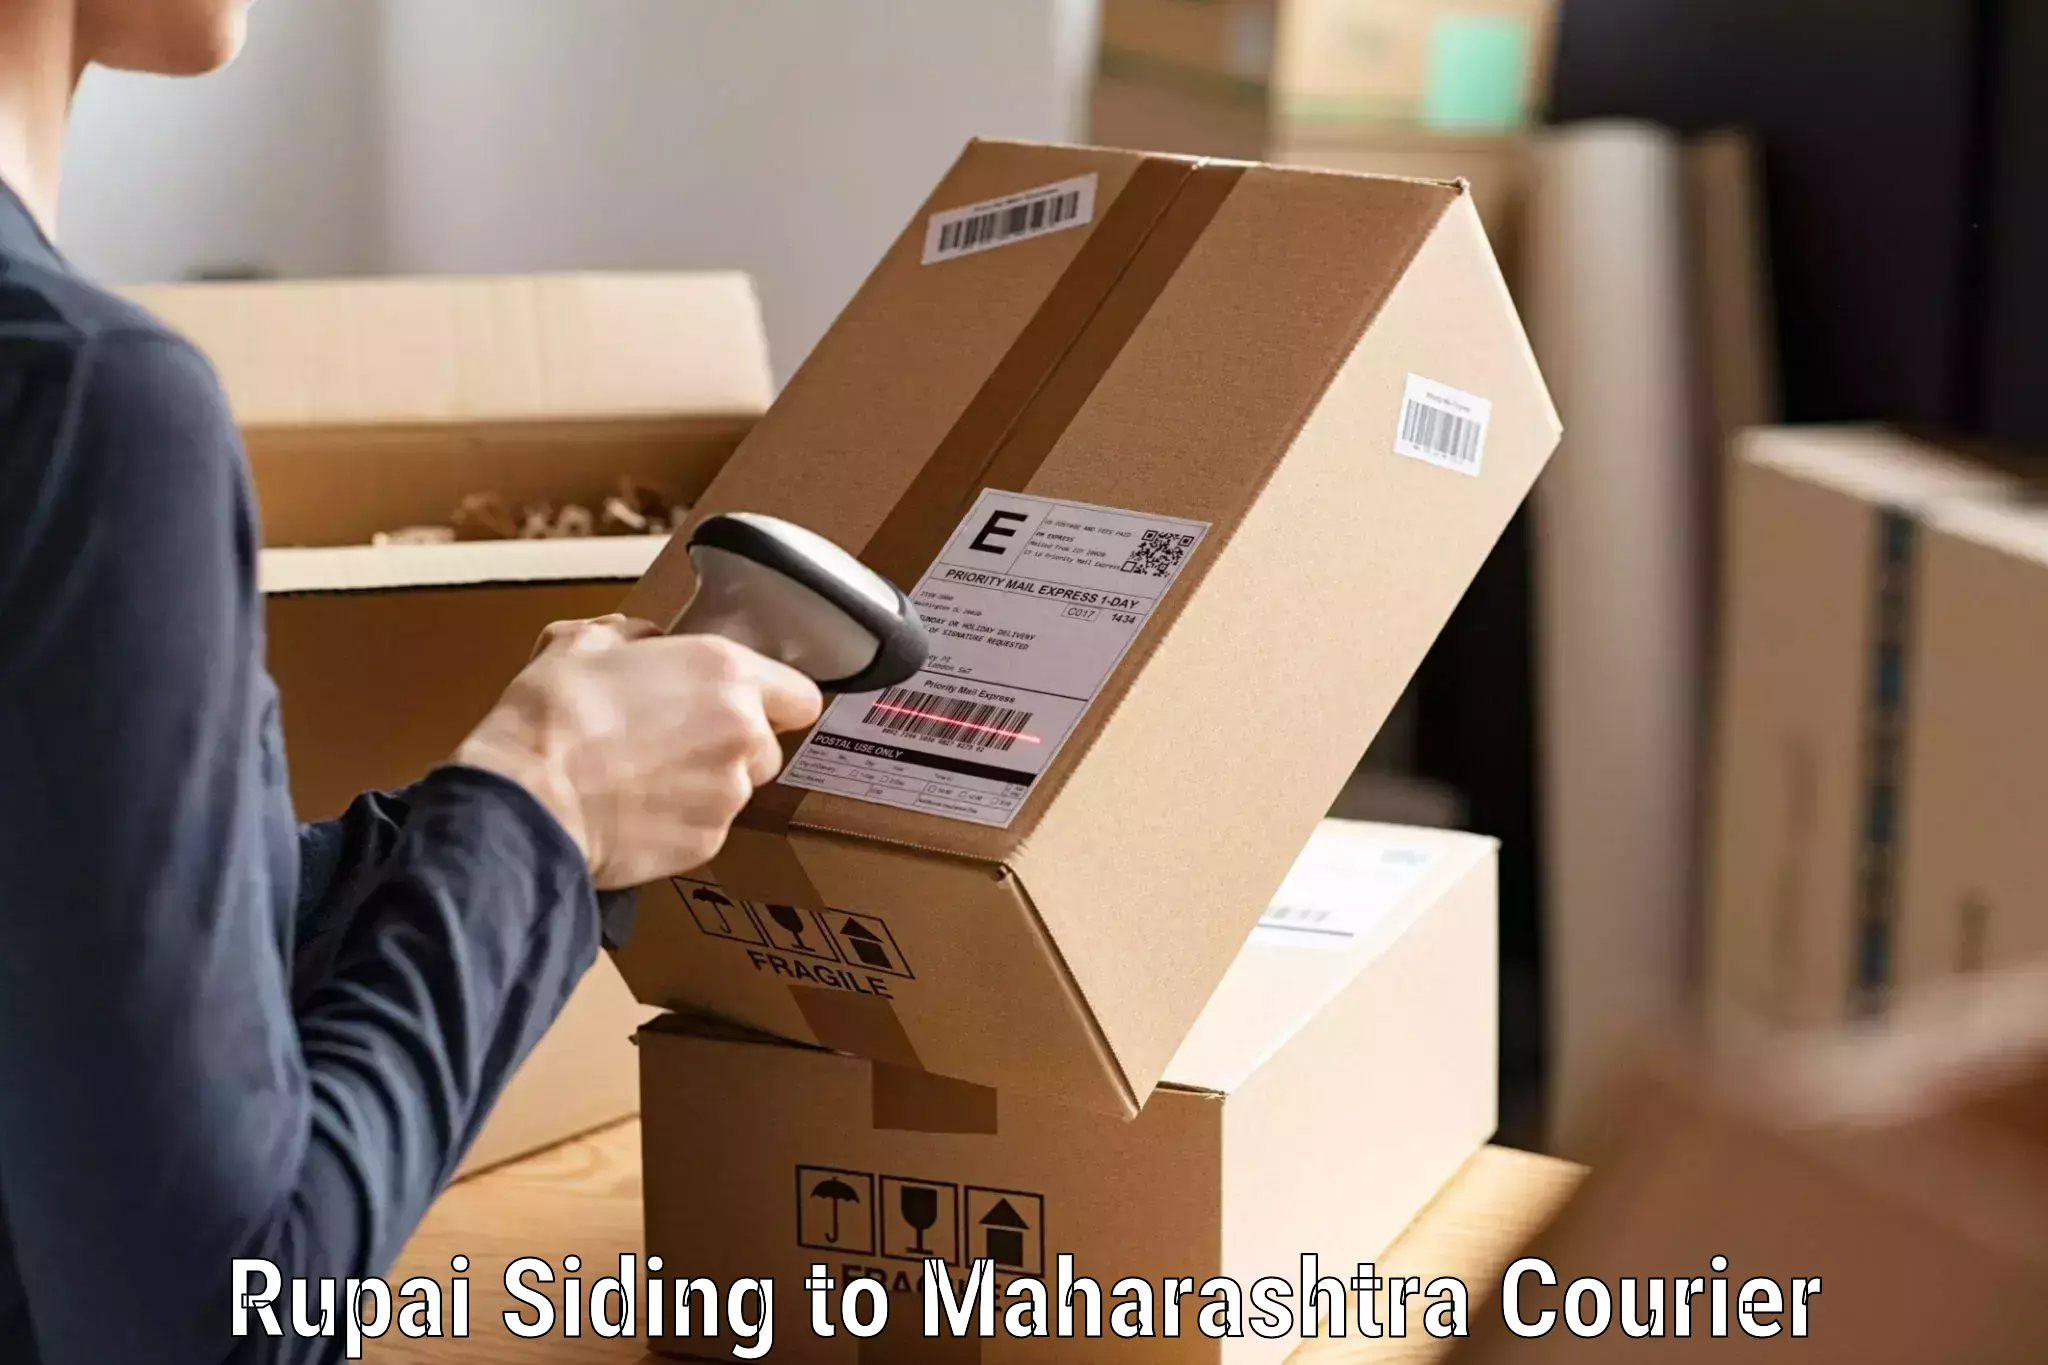 Parcel service for businesses Rupai Siding to Kalbadevi